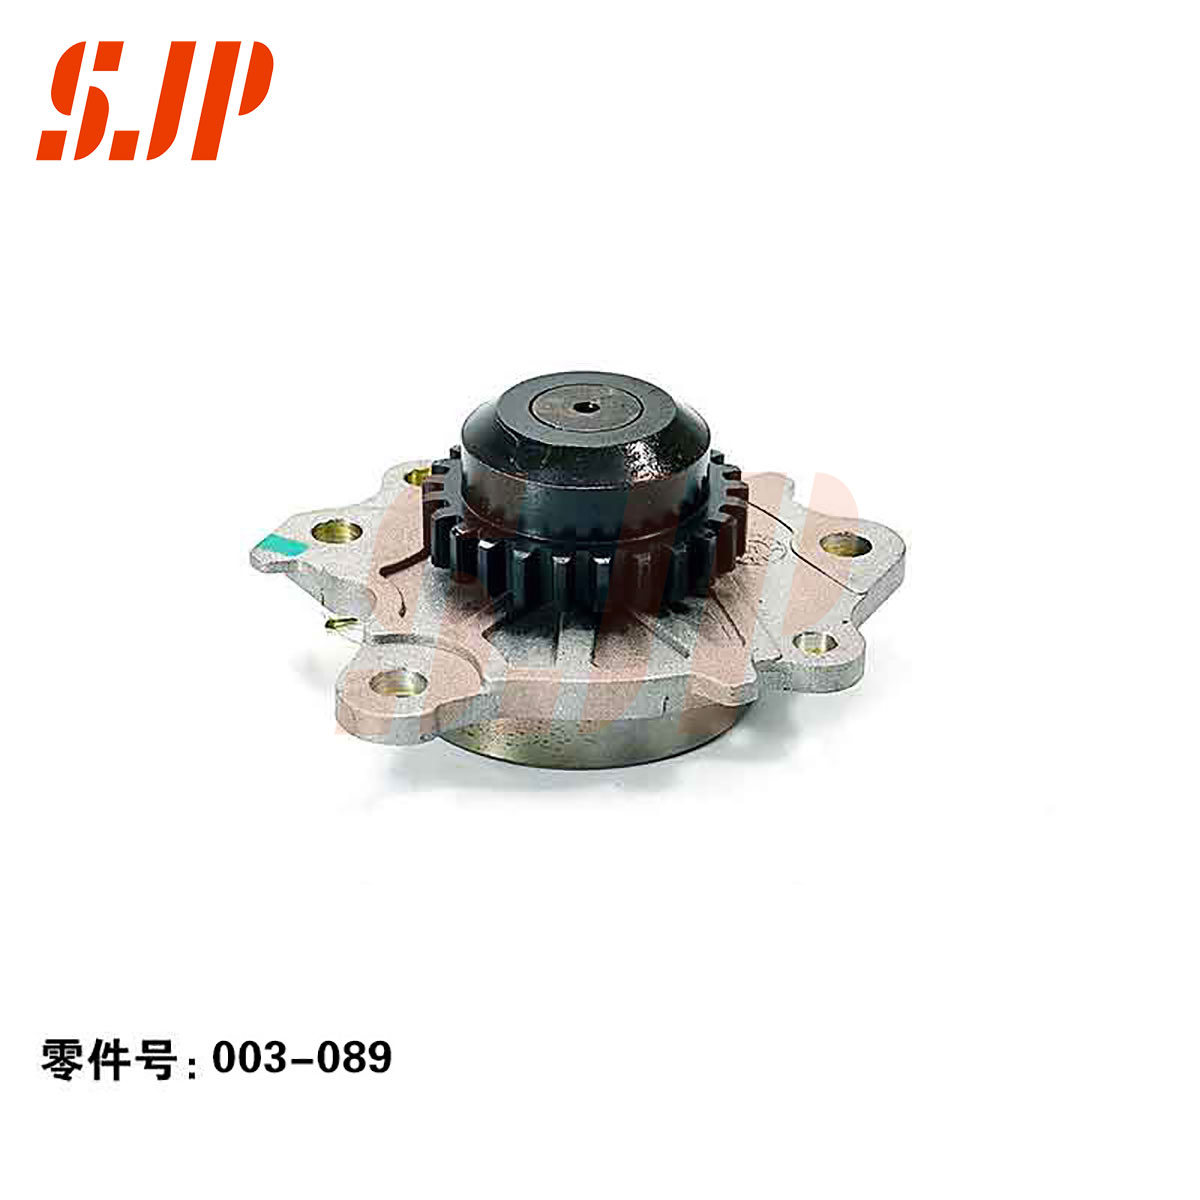 SJ-003-089 Oil Pump For China-Motor 4A13